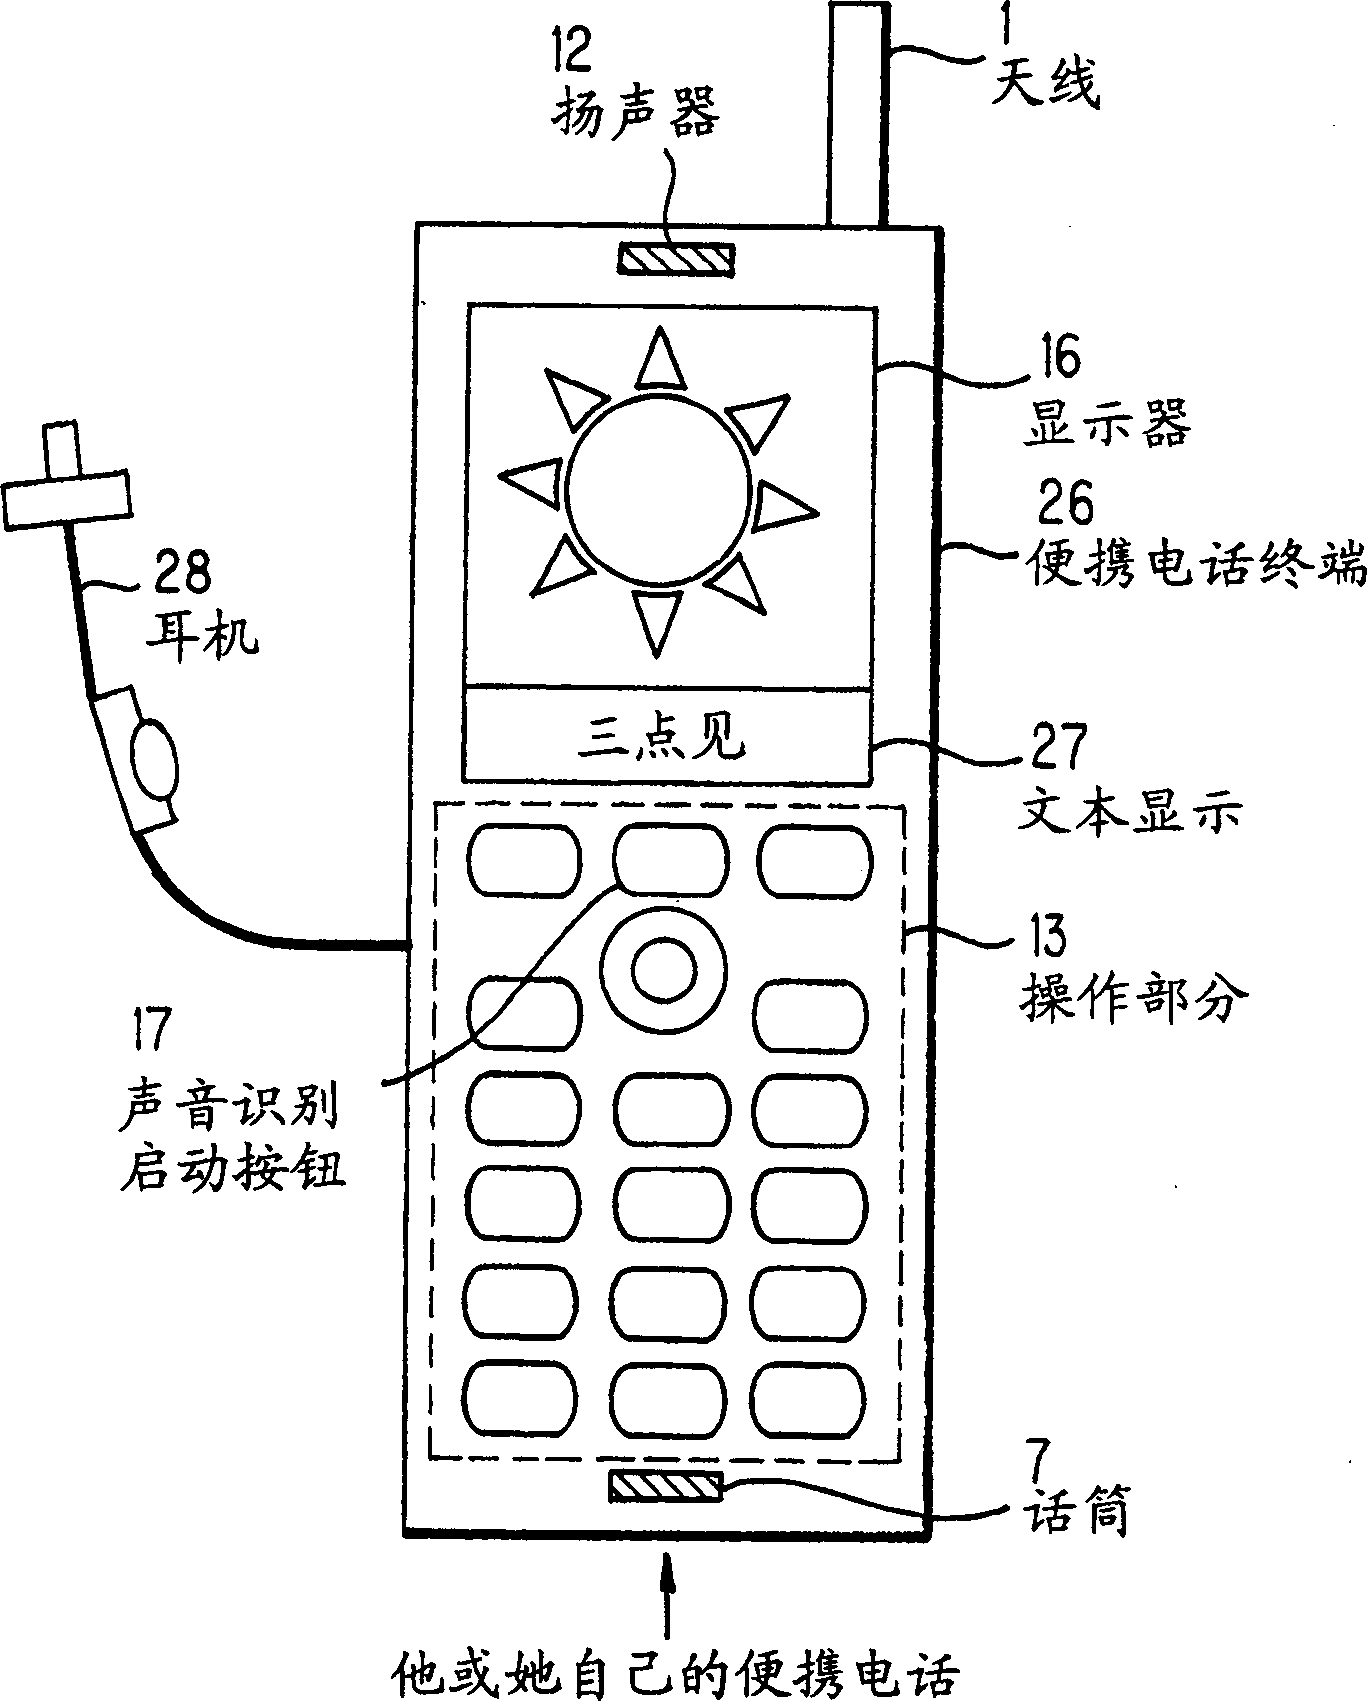 Terminal apparatus and communication control method